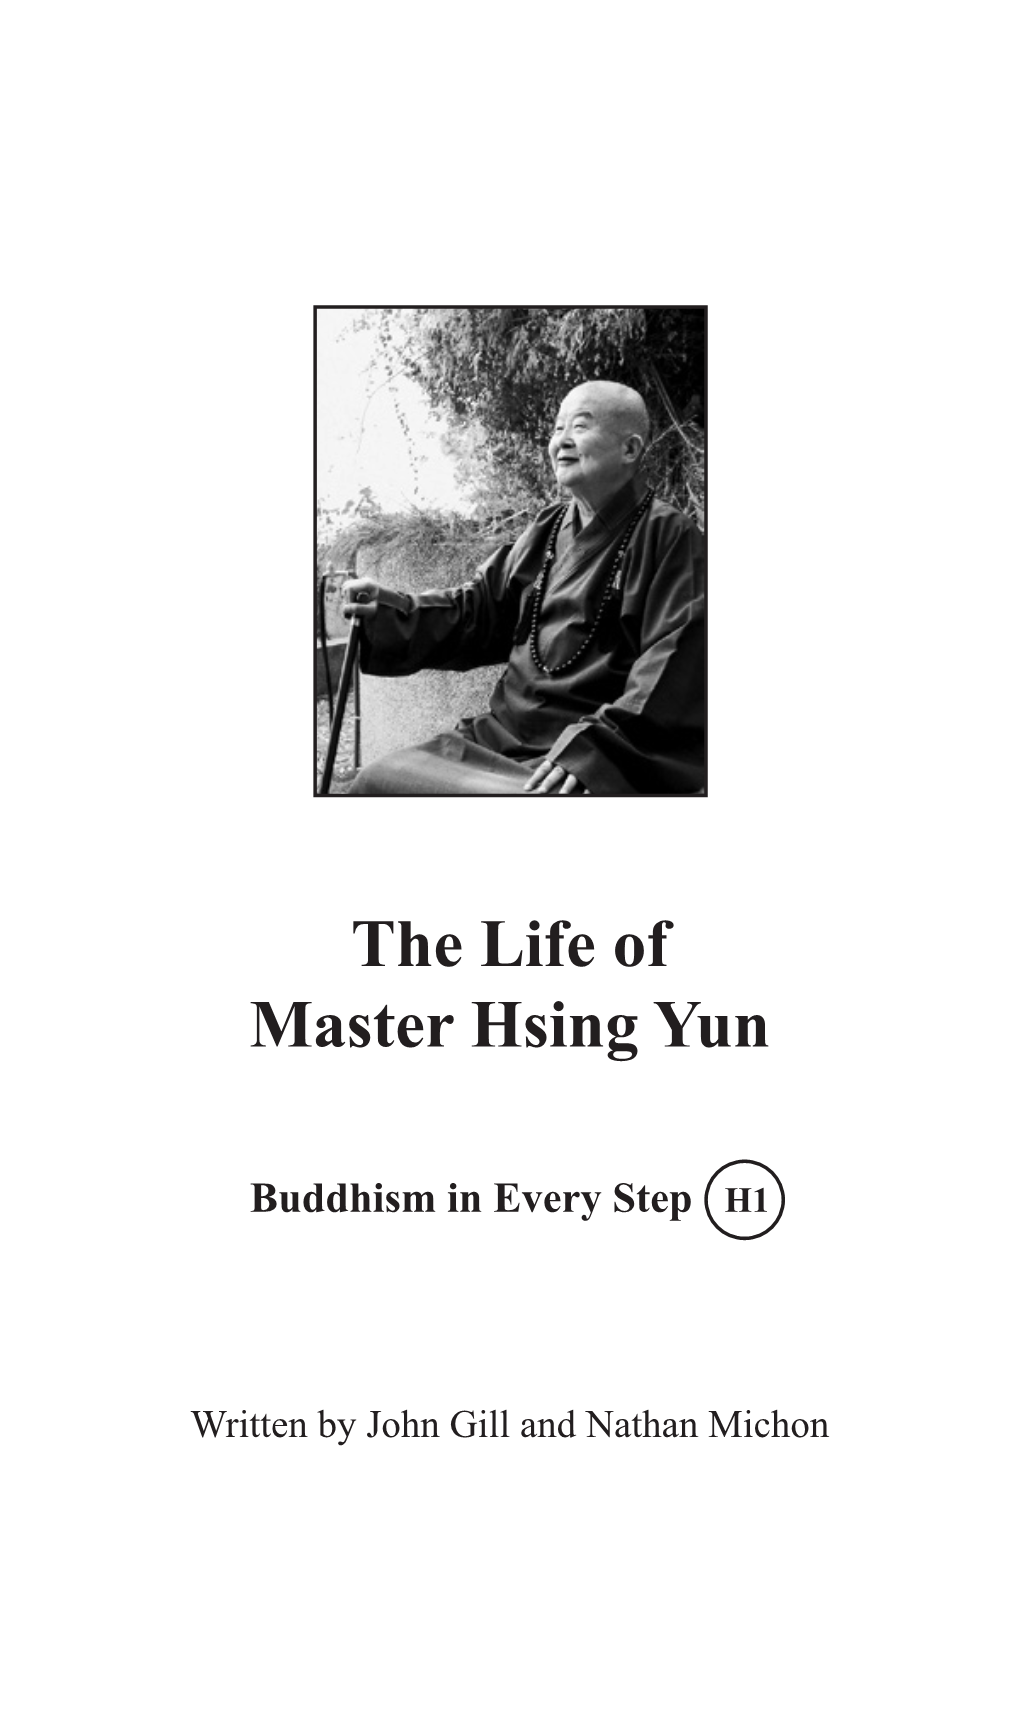 The Life of Master Hsing Yun